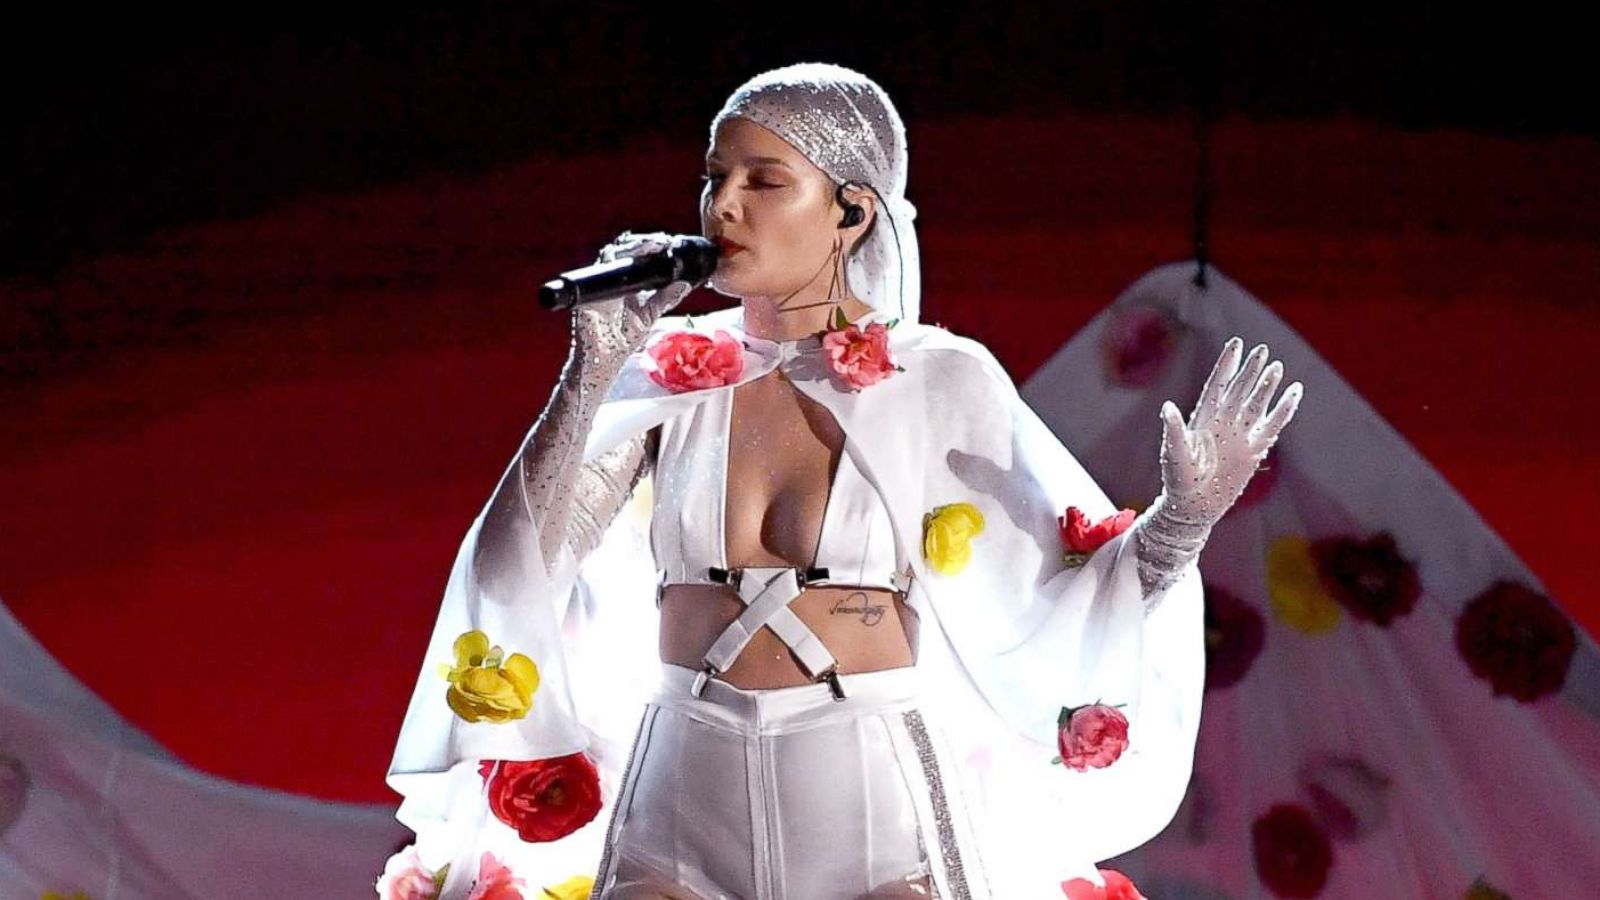 PHOTO: Halsey performs onstage during the 2017 Billboard Music Awards at T-Mobile Arena, May 21, 2017, in Las Vegas, Nevada.